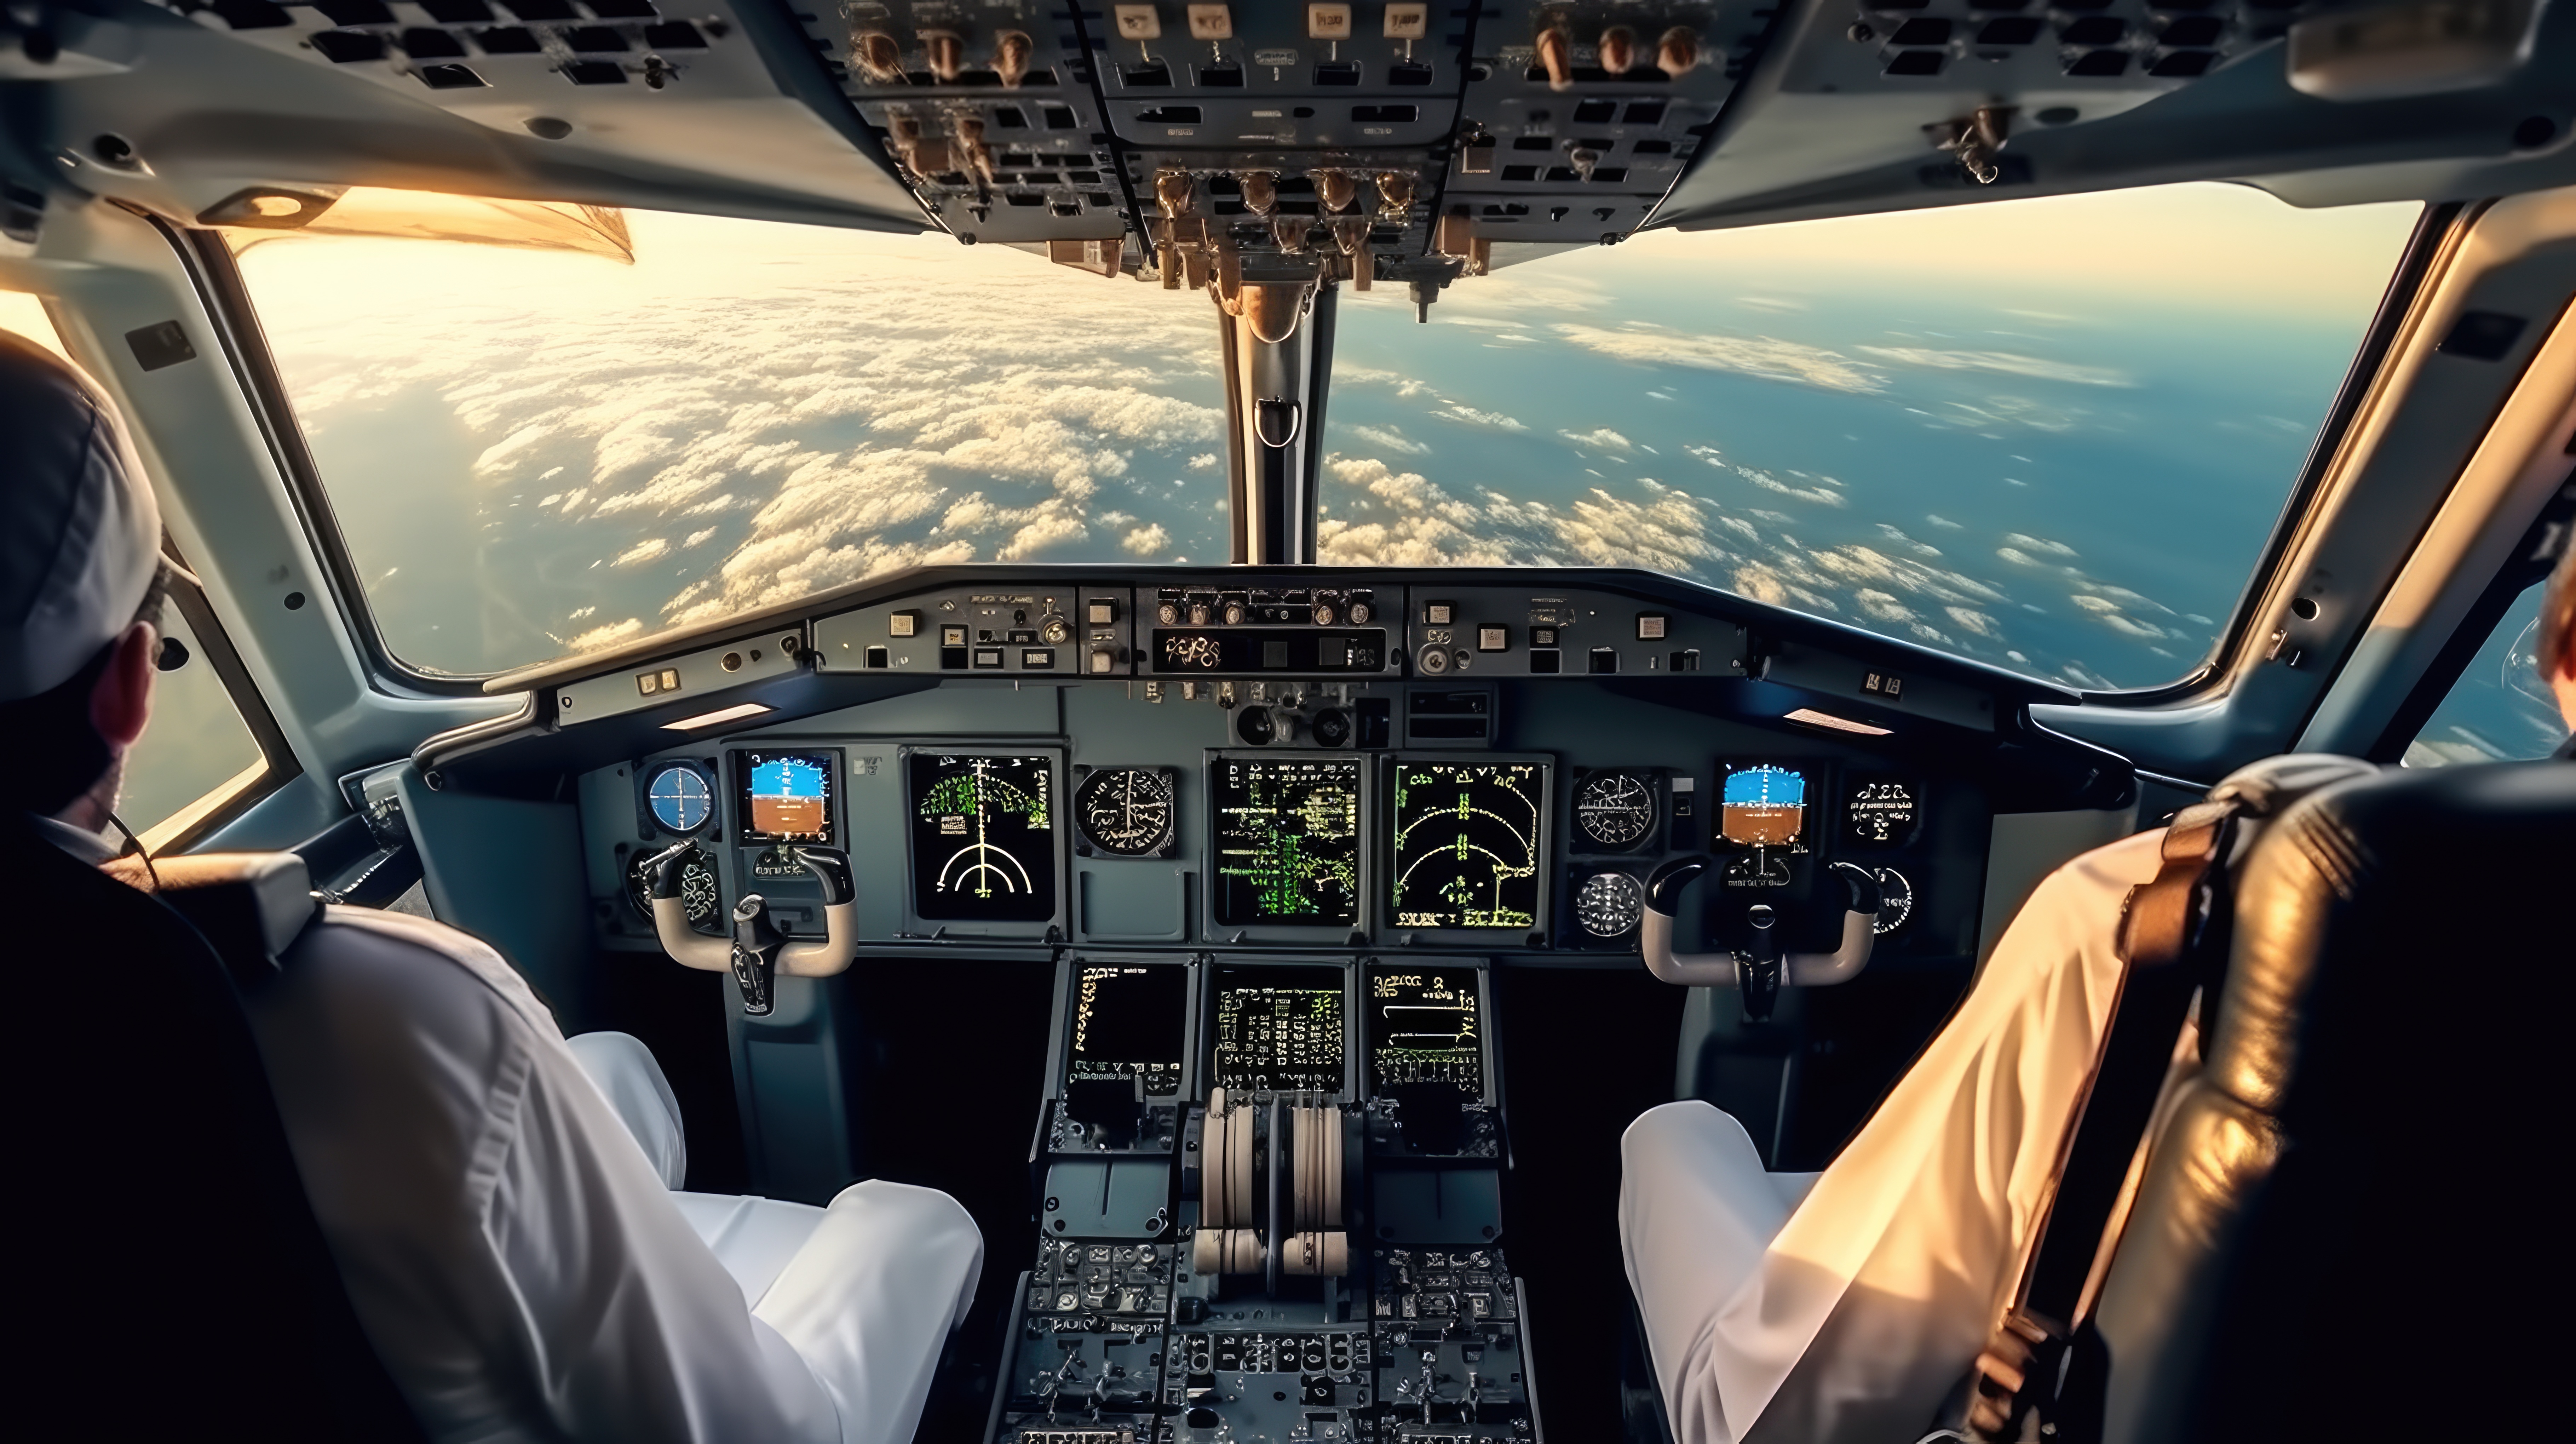 Our products support primary and secondary aircraft flight controls